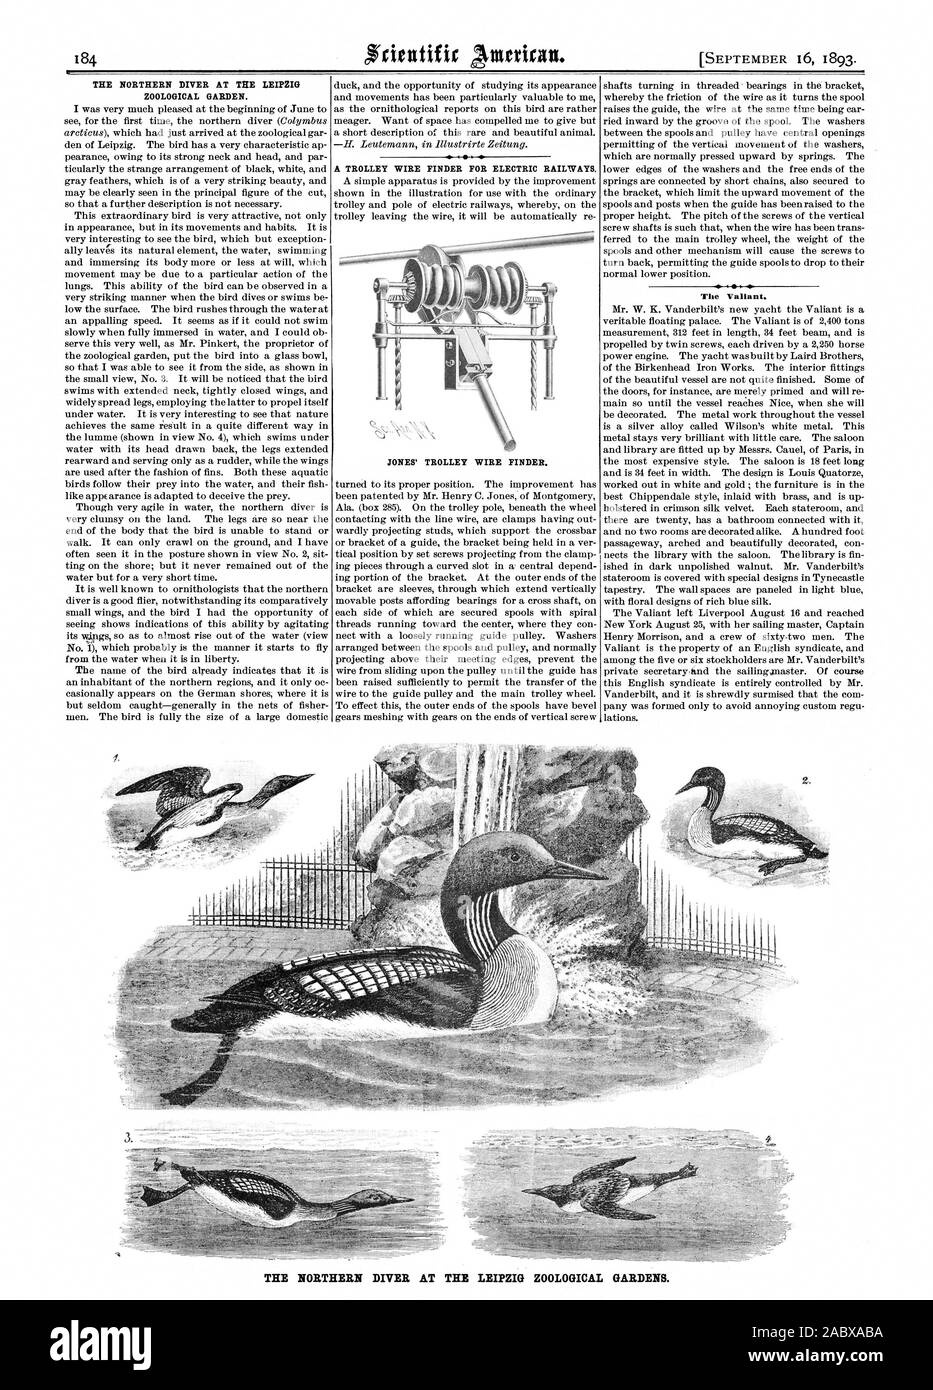 THE NORTHERN DIVER AT TRE LEIPZIG ZOOLOGICAL GARDEN. A TROLLEY WIRE FINDER FOR ELECTRIC RAILWAYS. JONES' TROLLEY WIRE FINDER. The Valiant. THE NORTHERN DIVER AT THE LEIPZIG ZOOLOGICAL GARDENS., scientific american, 1893-09-16 Stock Photo